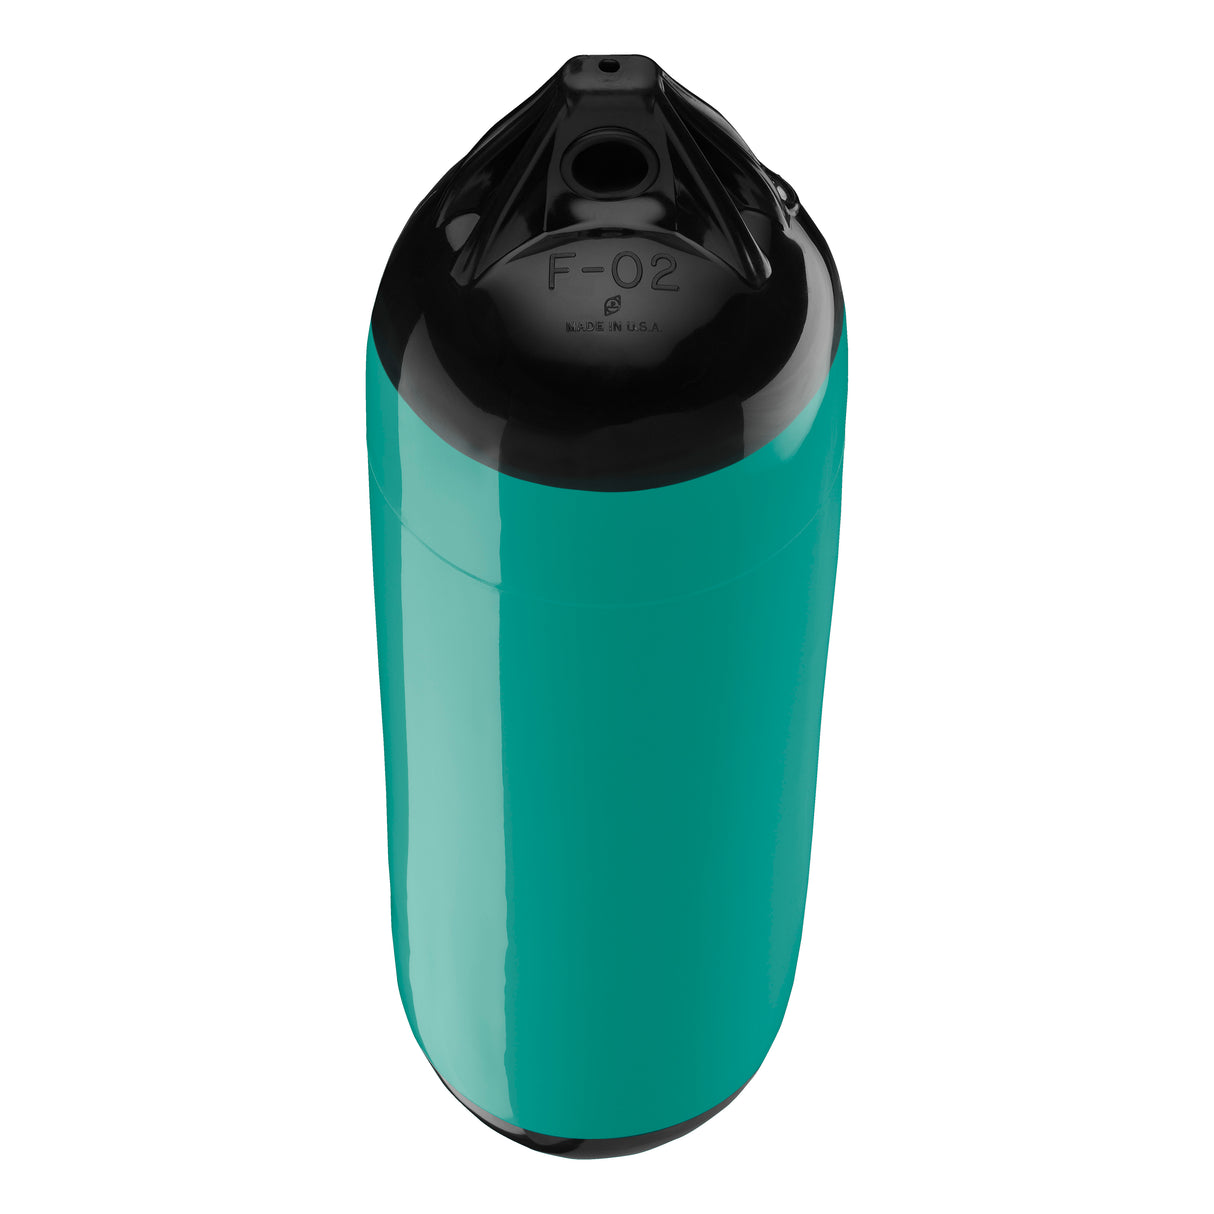 Teal boat fender with Black-Top, Polyform F-02 angled shot